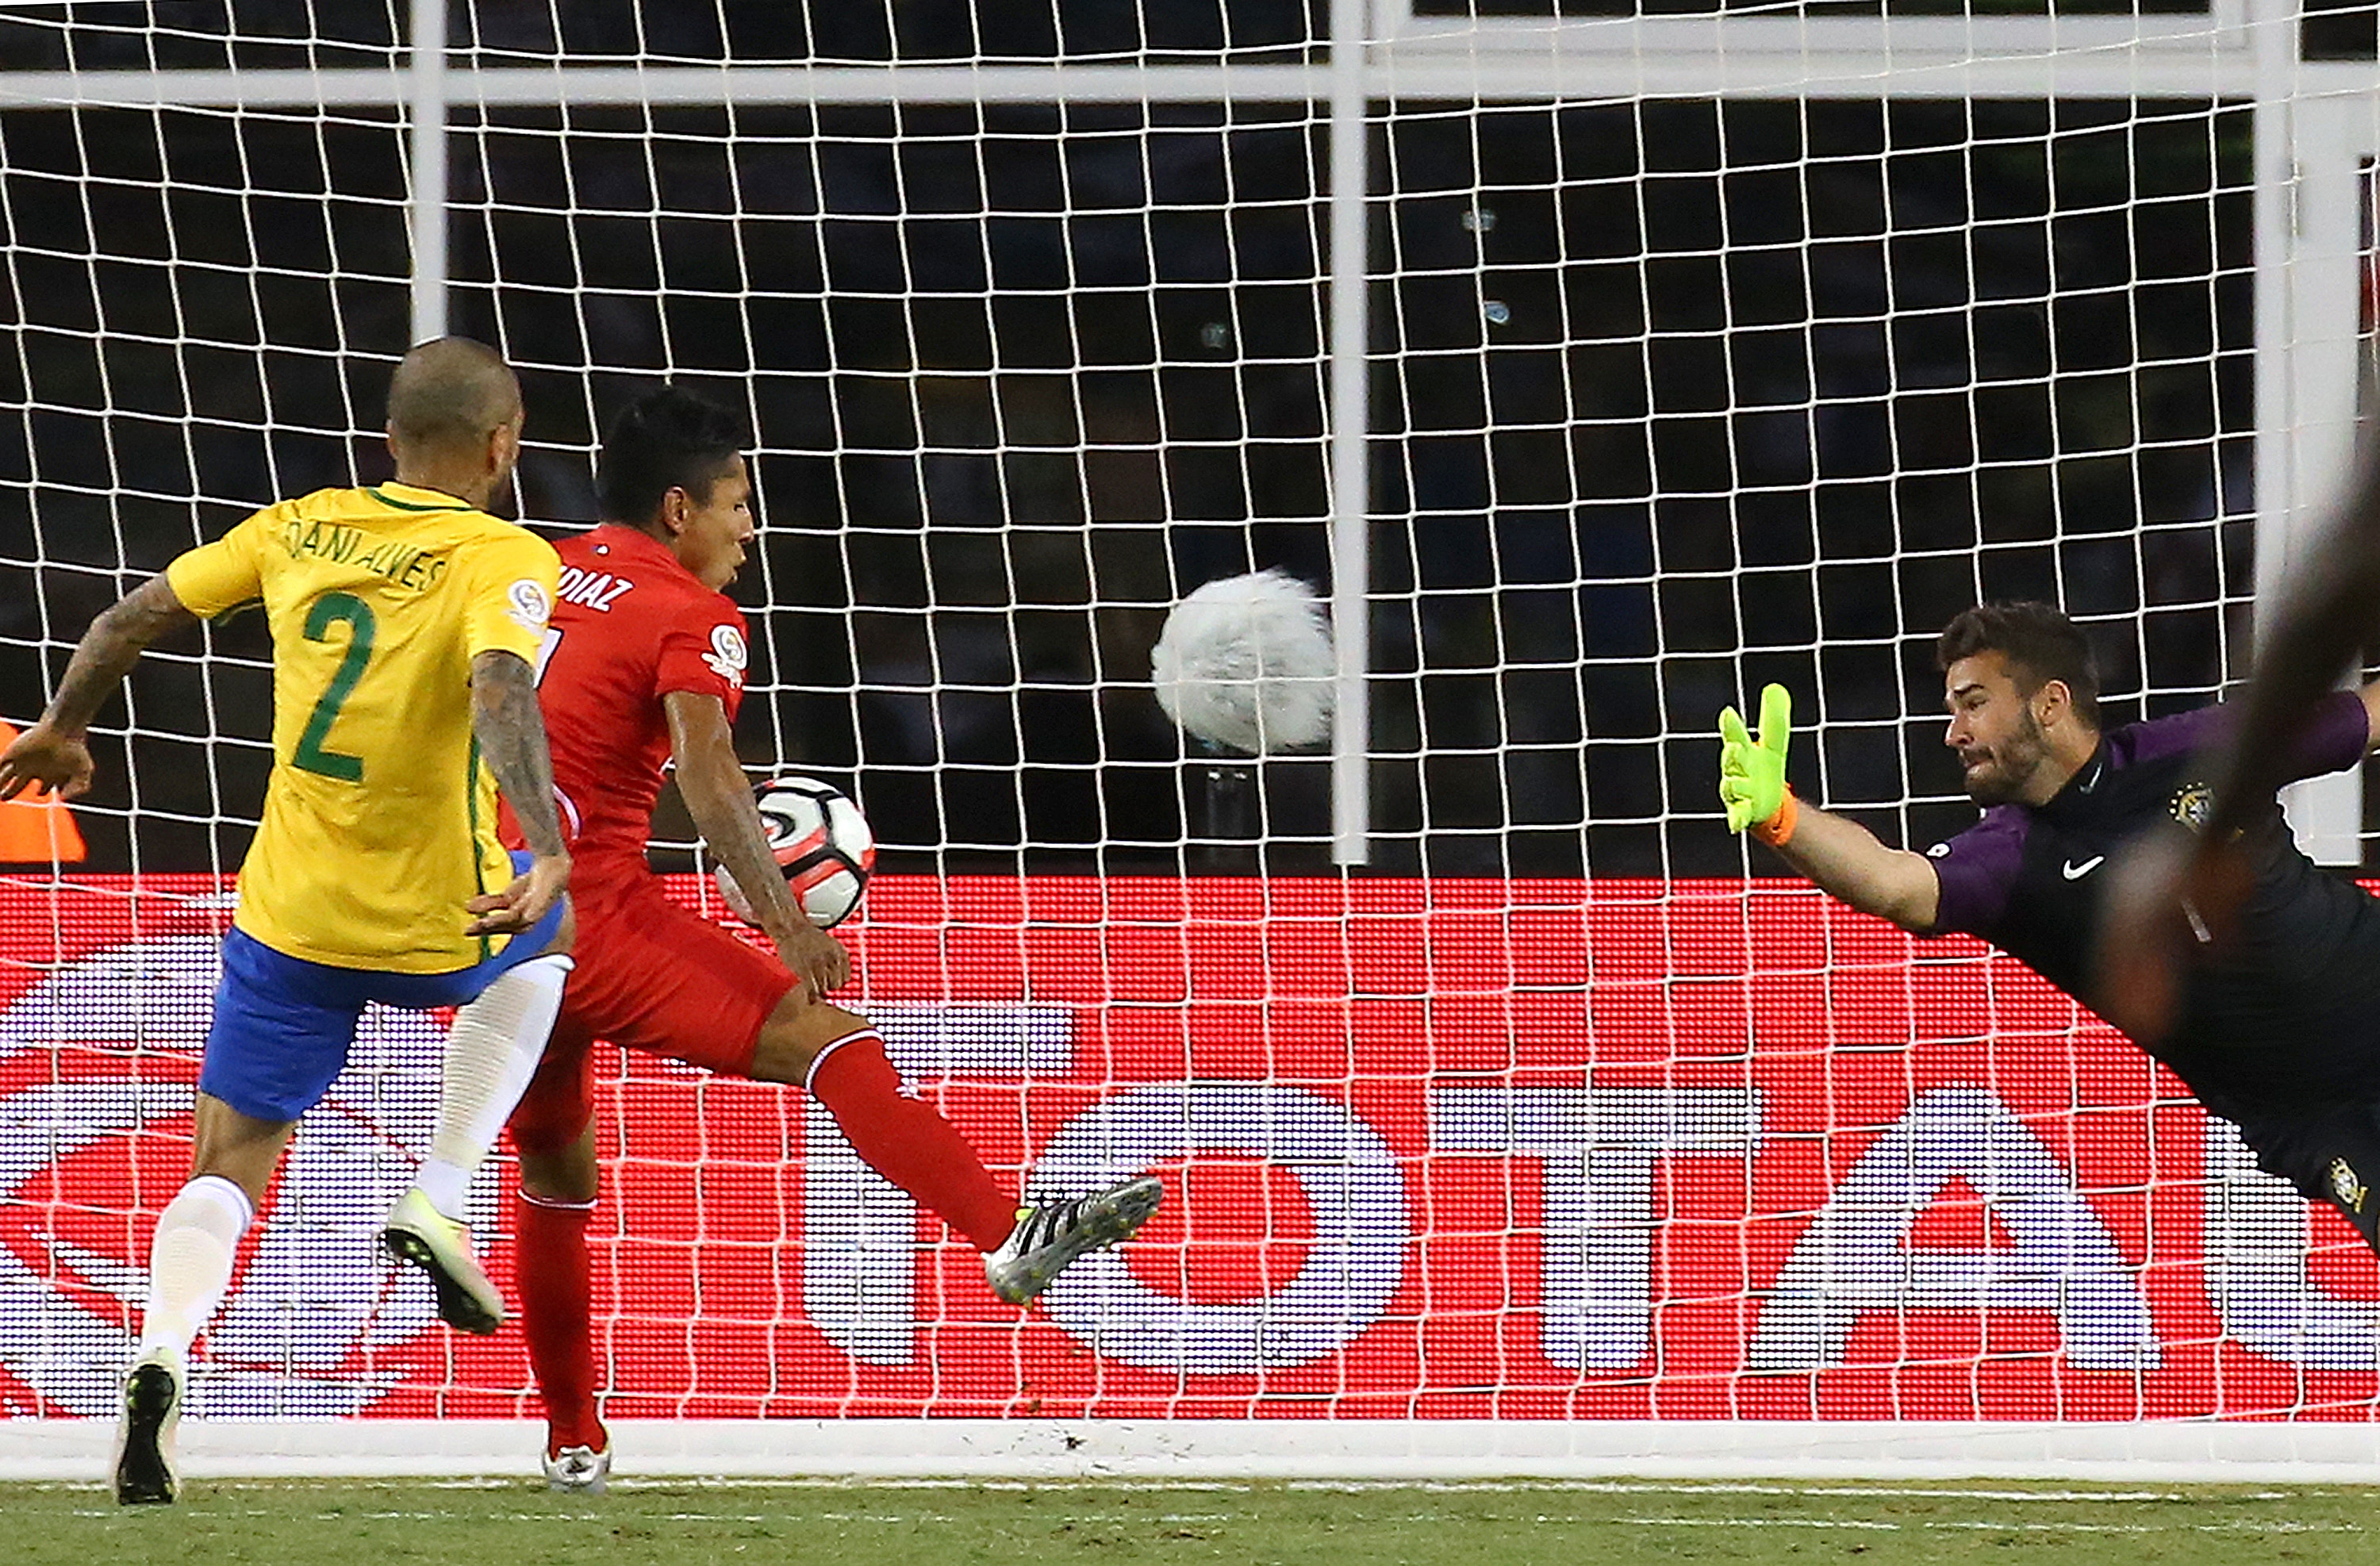 Brazil knocked out of Copa America after Peru’s ‘handball' goal